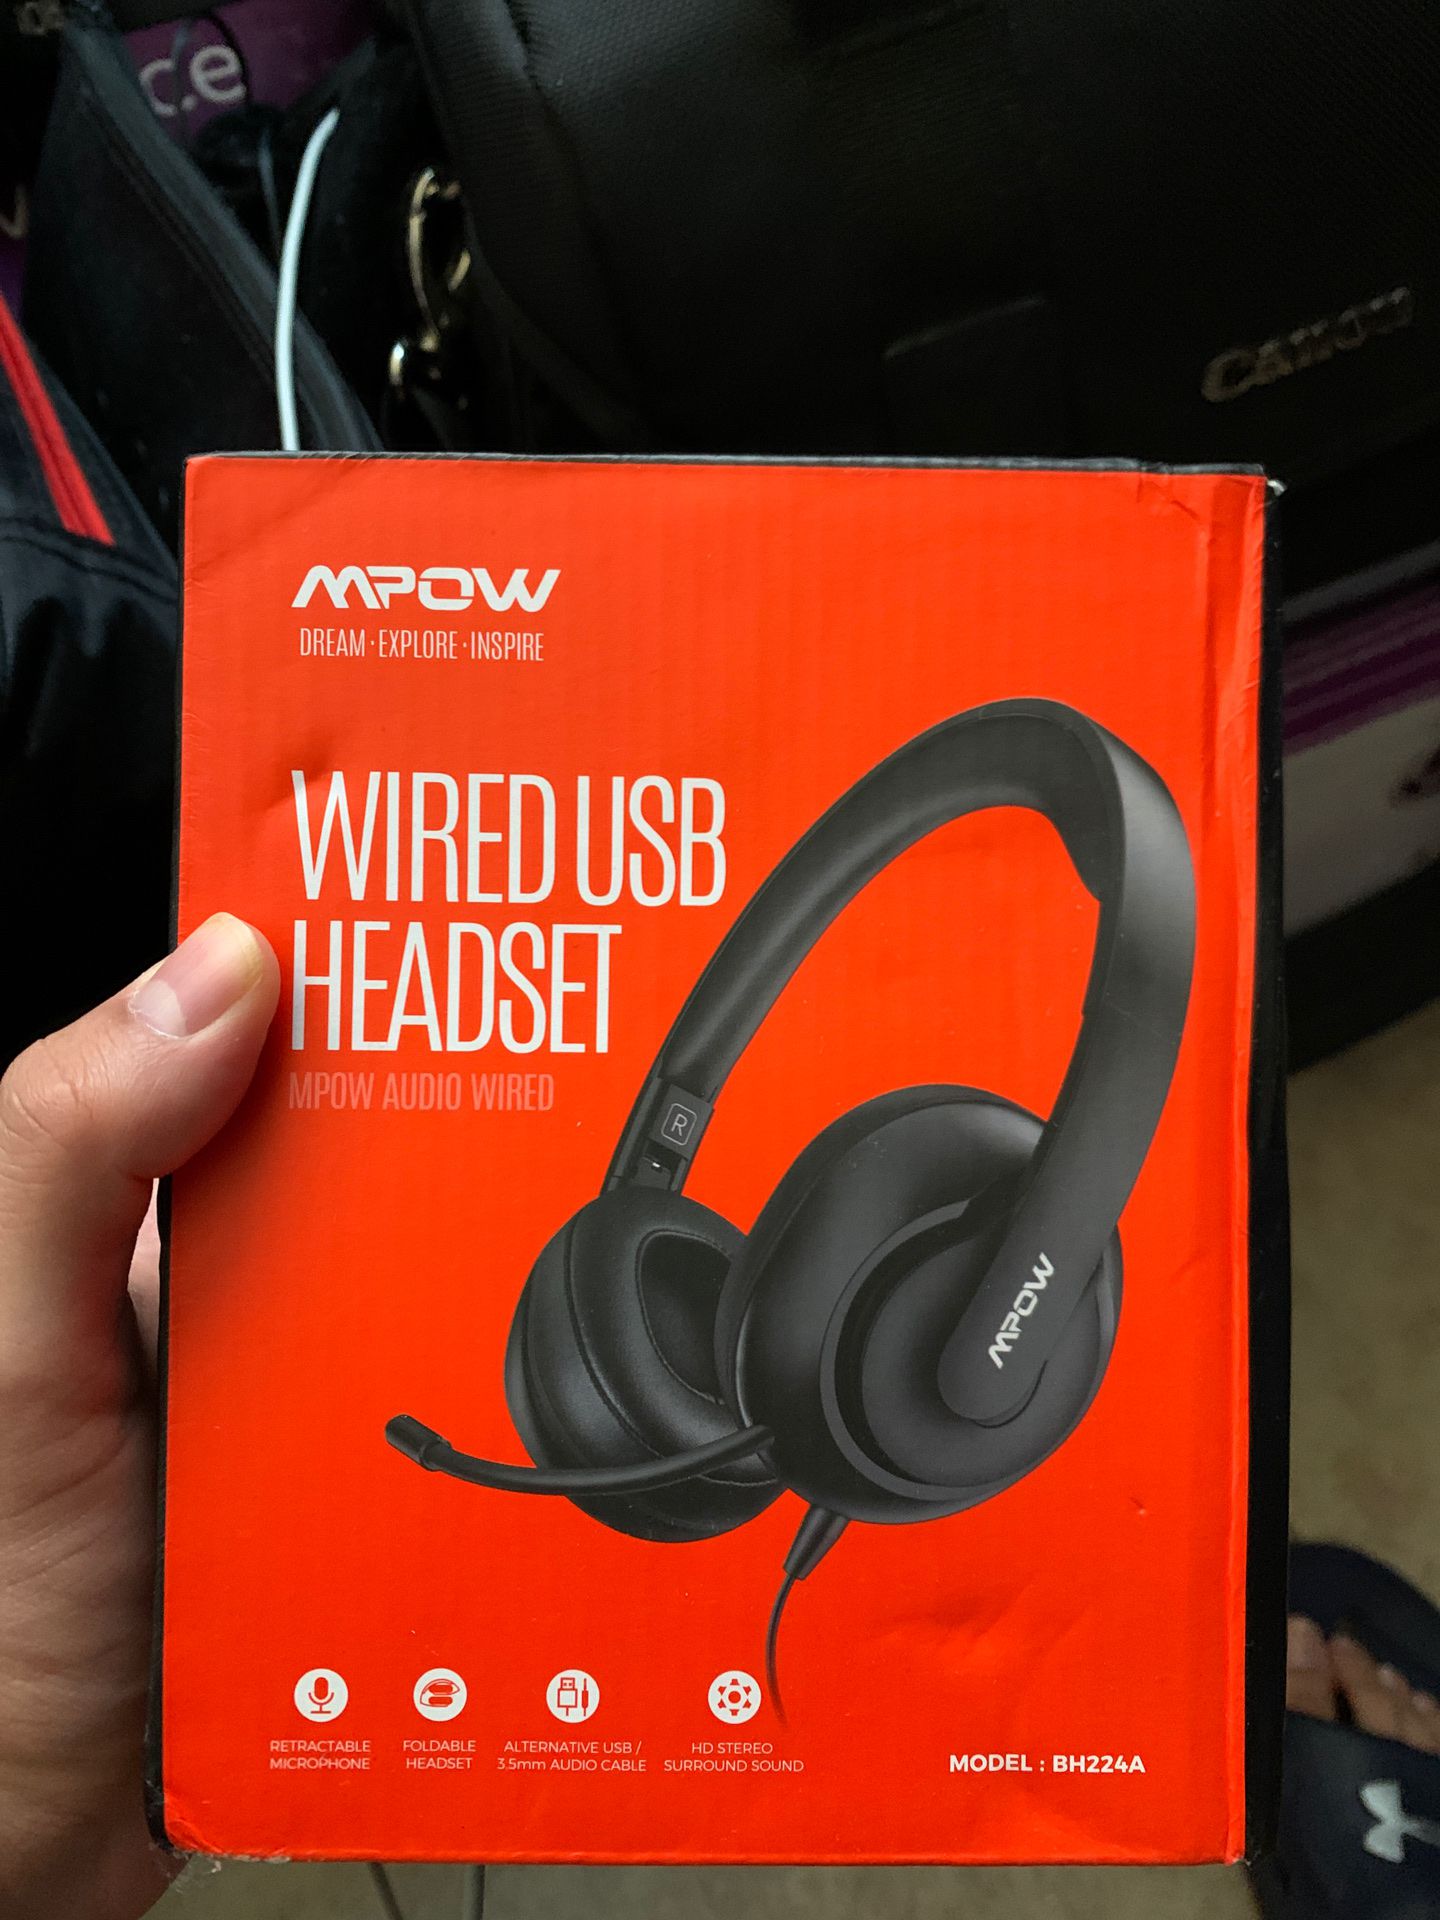 Wired USB Headset NEW